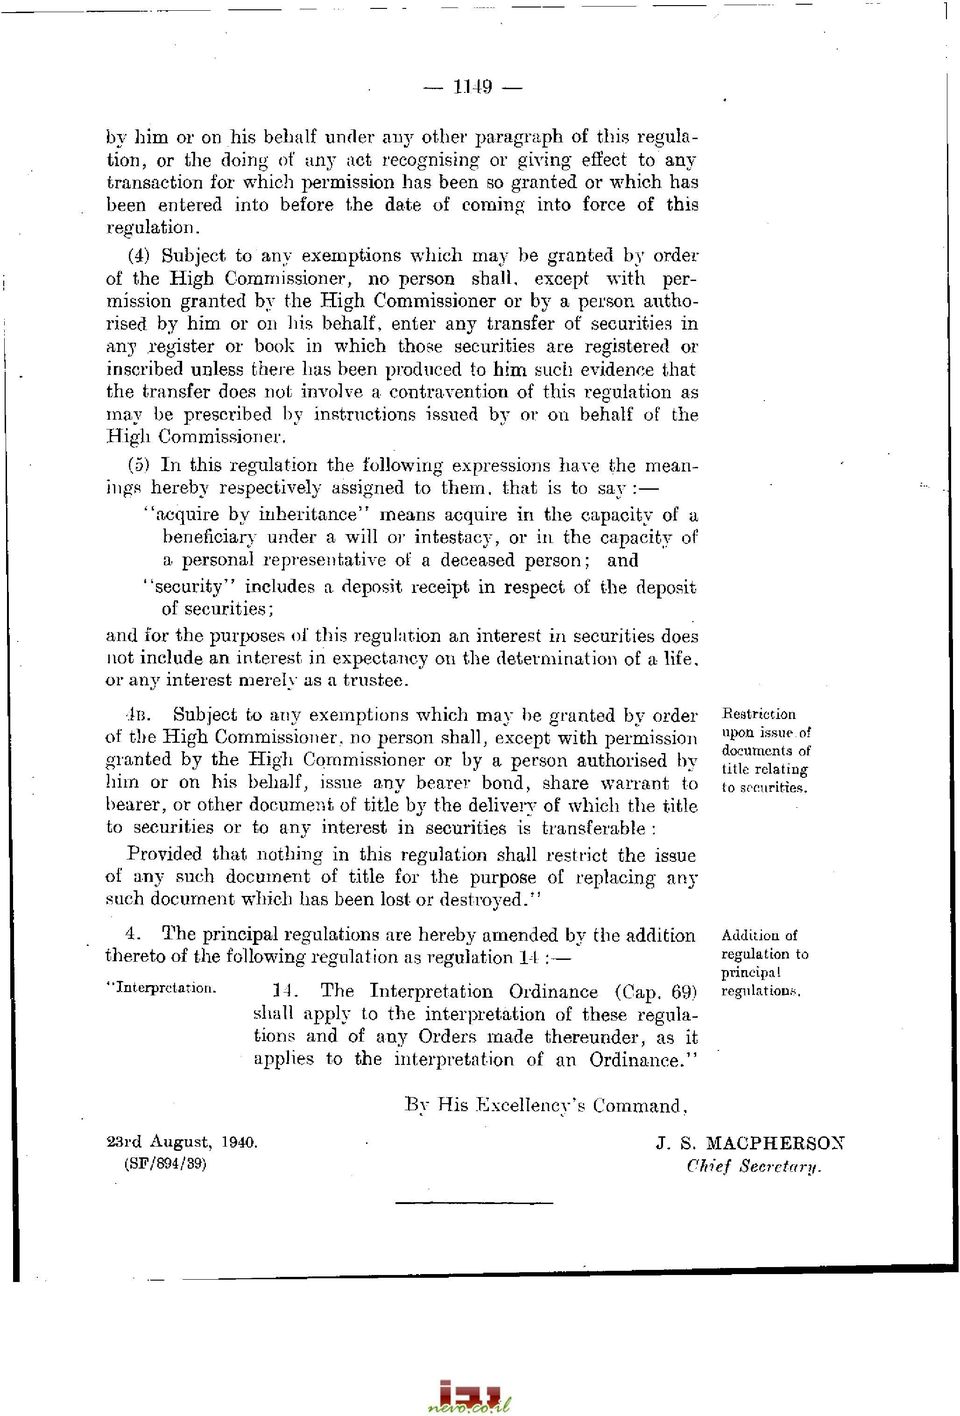 (4) Subject to any exemptions which may be granted by order of the High Commissioner, no person shall, except with permission granted by the High Commissioner or by a person authorised by him or on